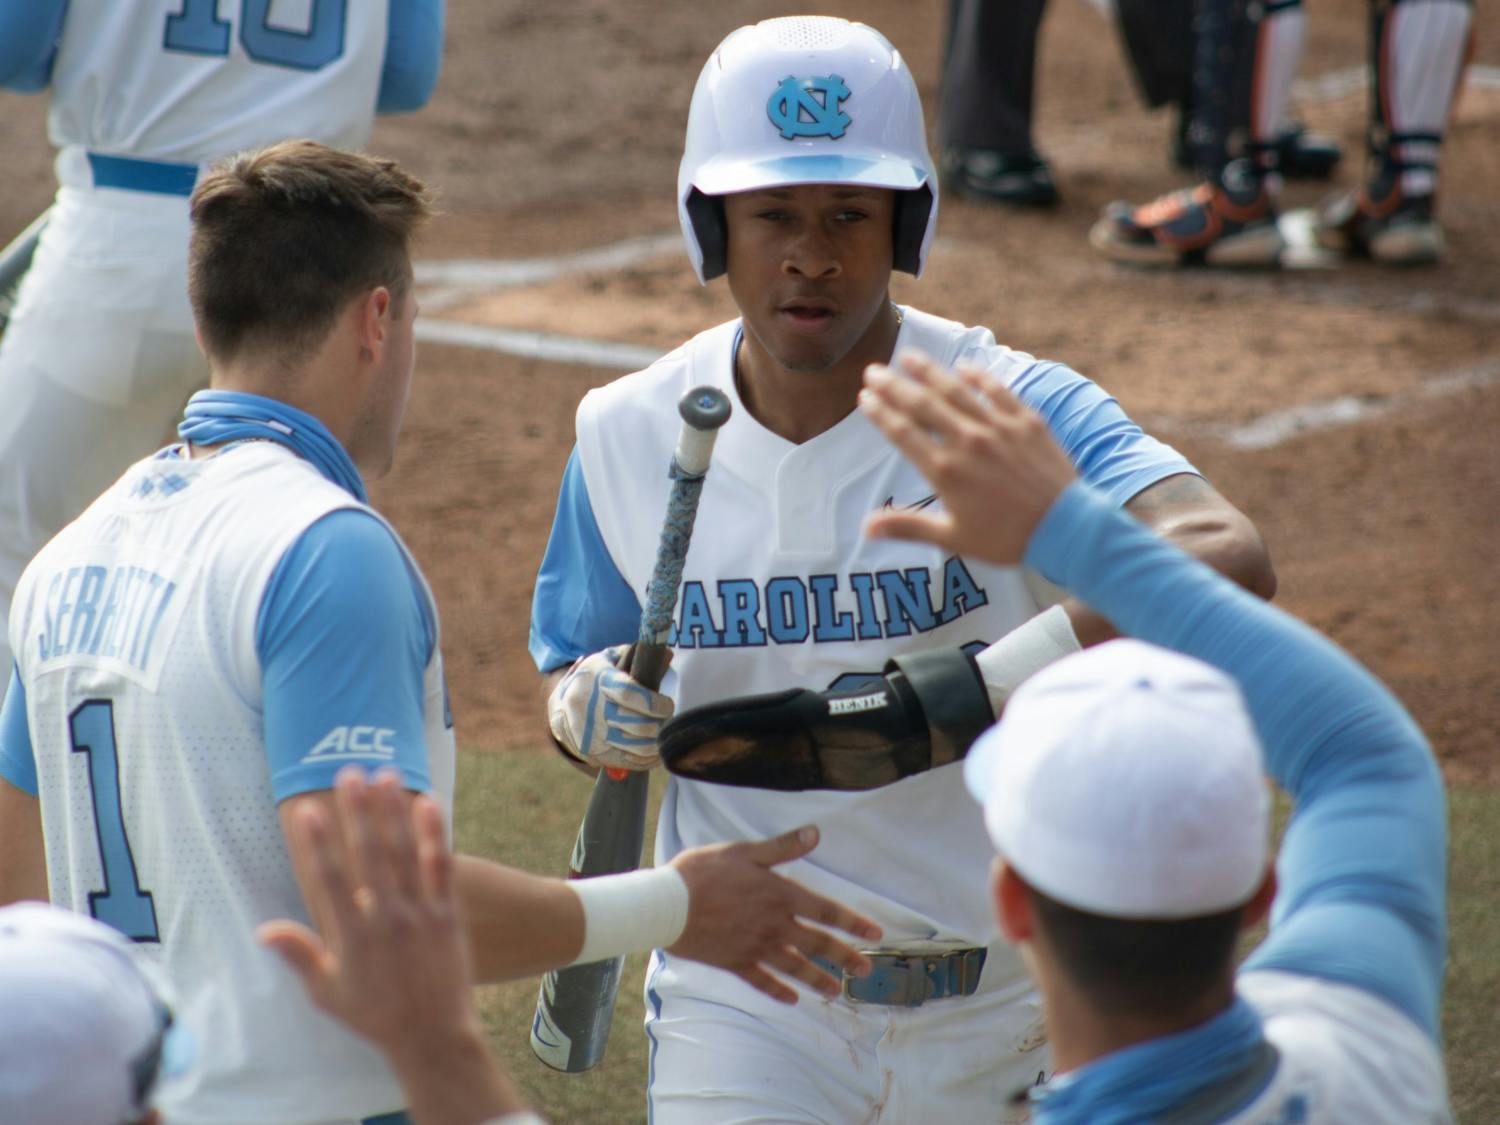 Sophomore outfielder Justice Thompson (20) gets high fives from teammates after stealing home against University of Virginia on Saturday, Feb. 27, 2021. The Tar Heels beat the Cavliers 2-1.